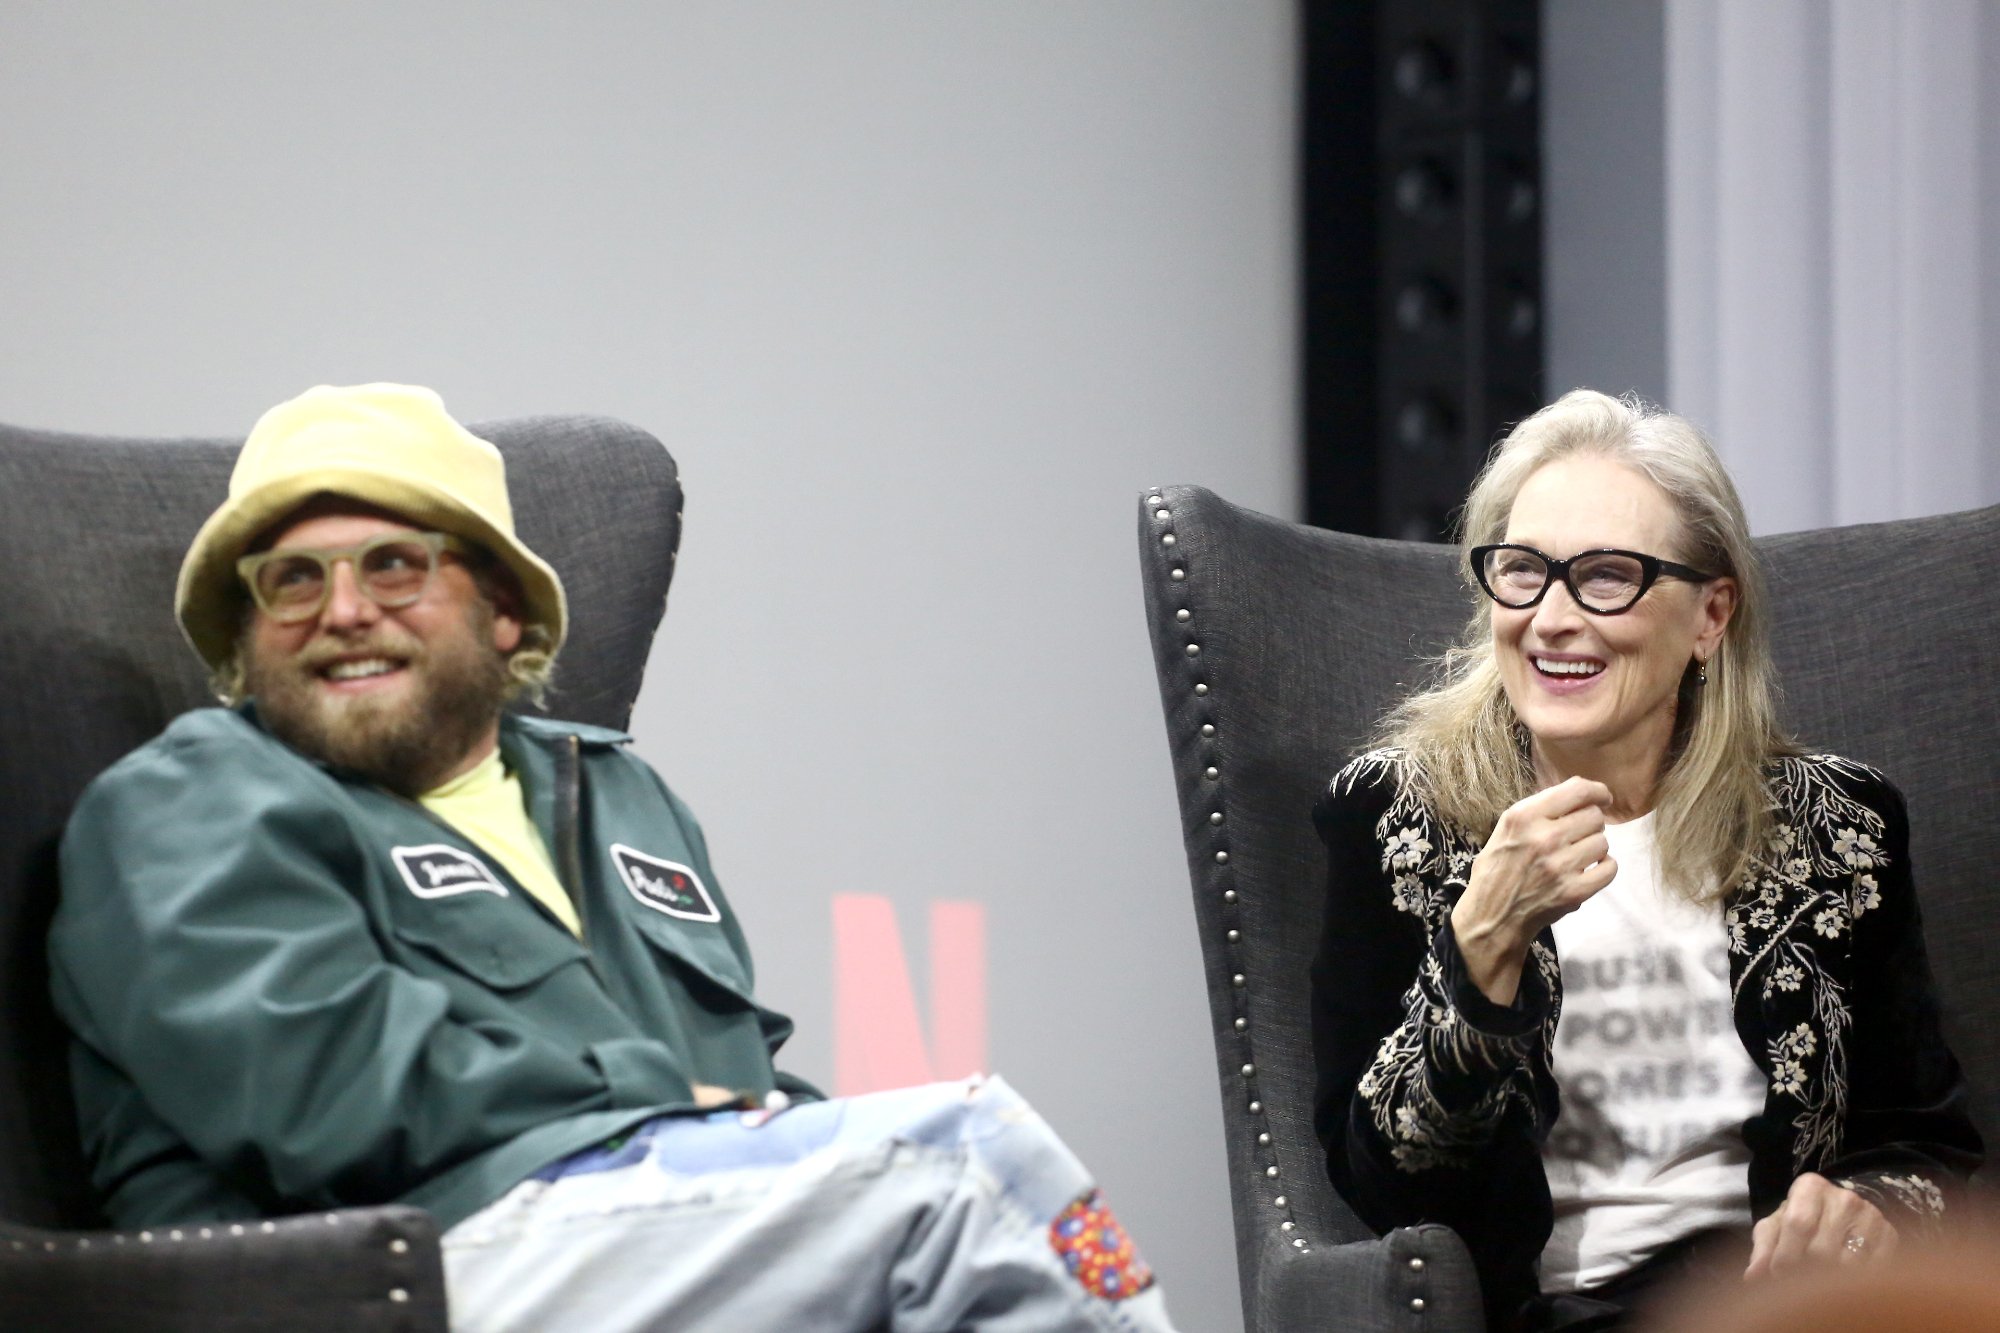 'Don't Look Up stars Meryl Streep and Jonah Hill smiling and sitting in grey couch chairs in front of a silver screen